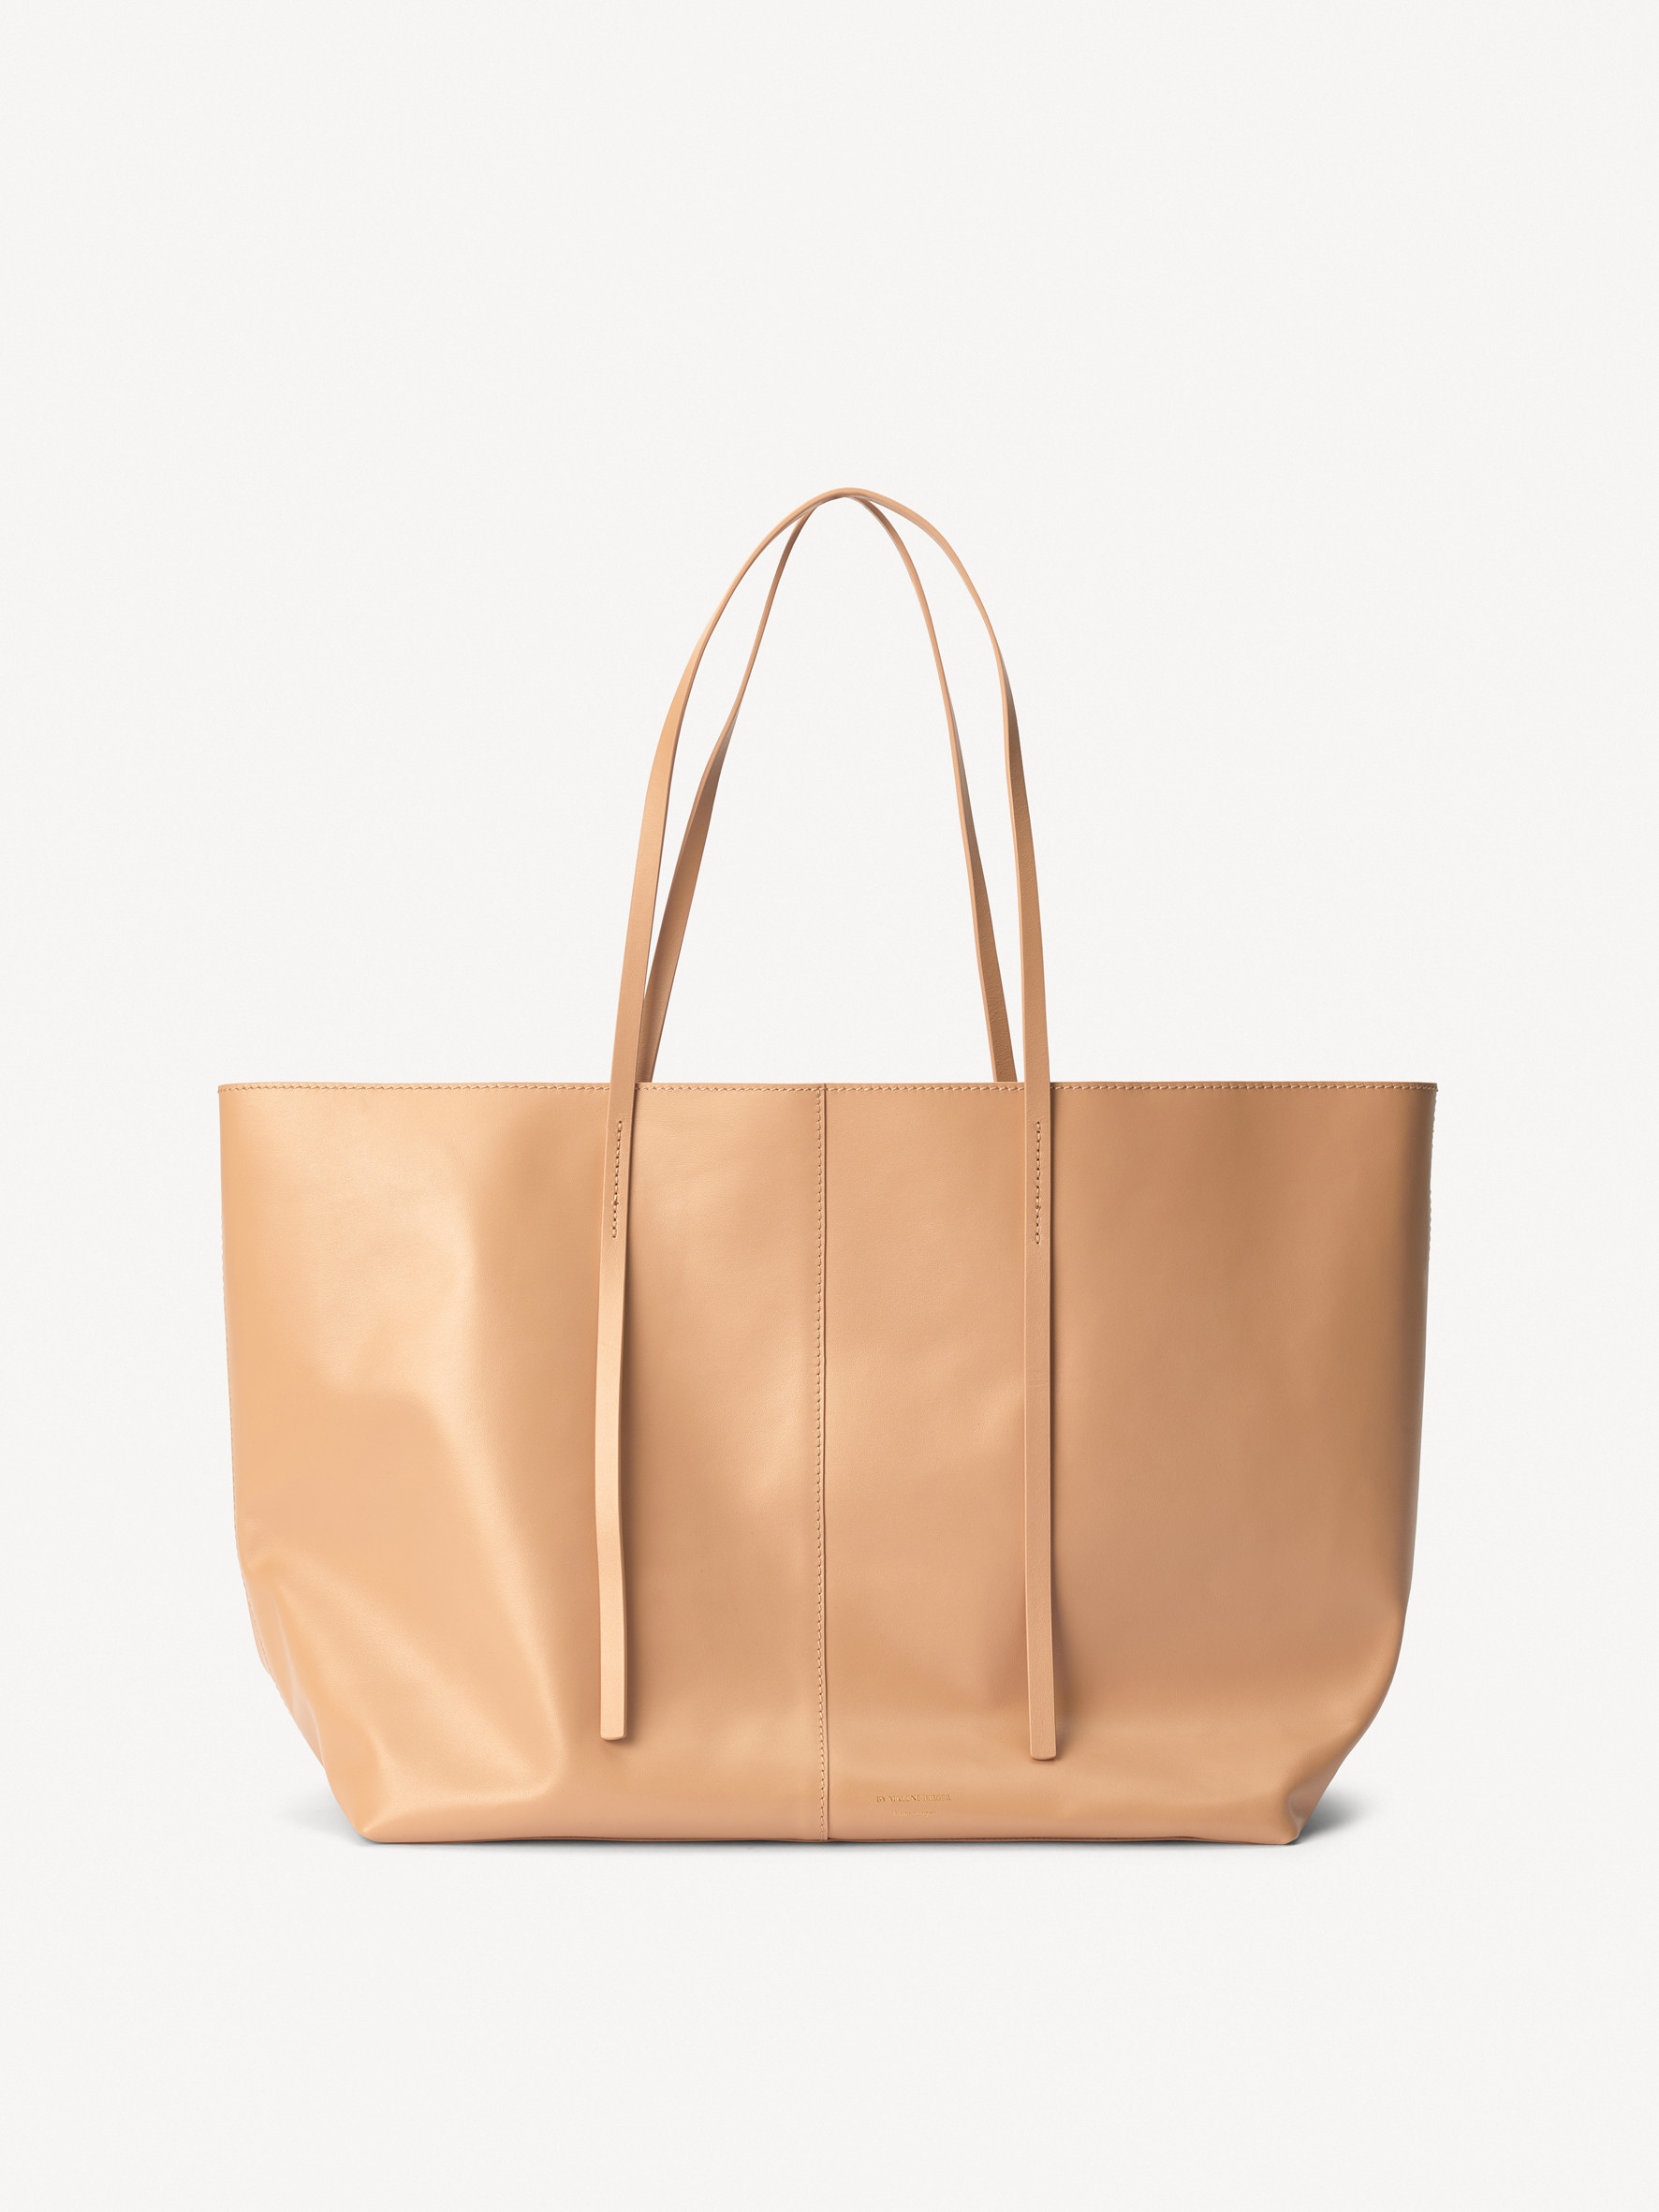 Abilla smooth leather tote Buy online